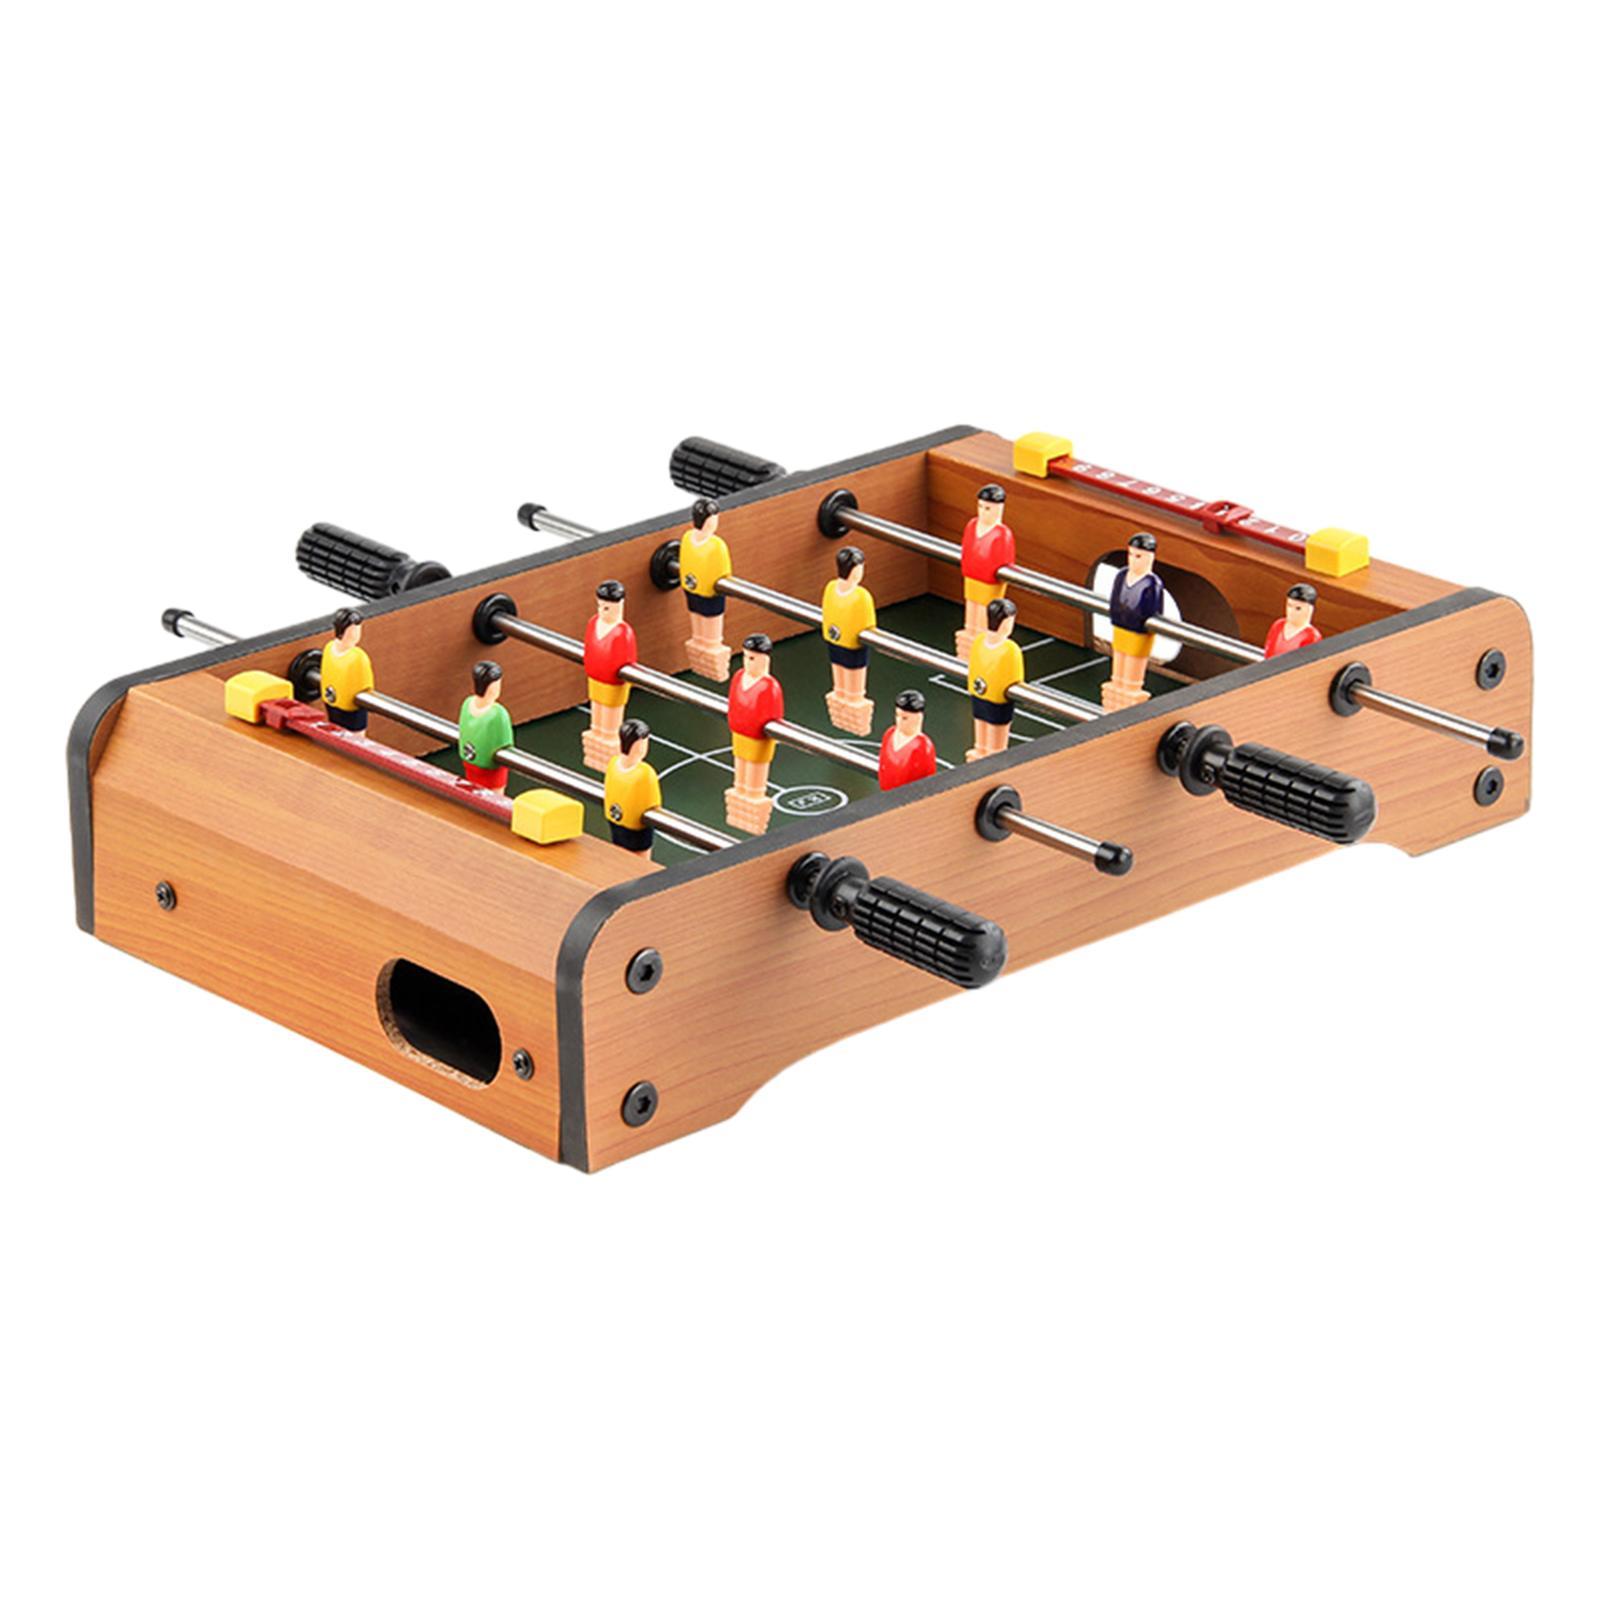 Mini Foosball Table Soccer Compact Mini Tabletop Soccer Game for Family Game